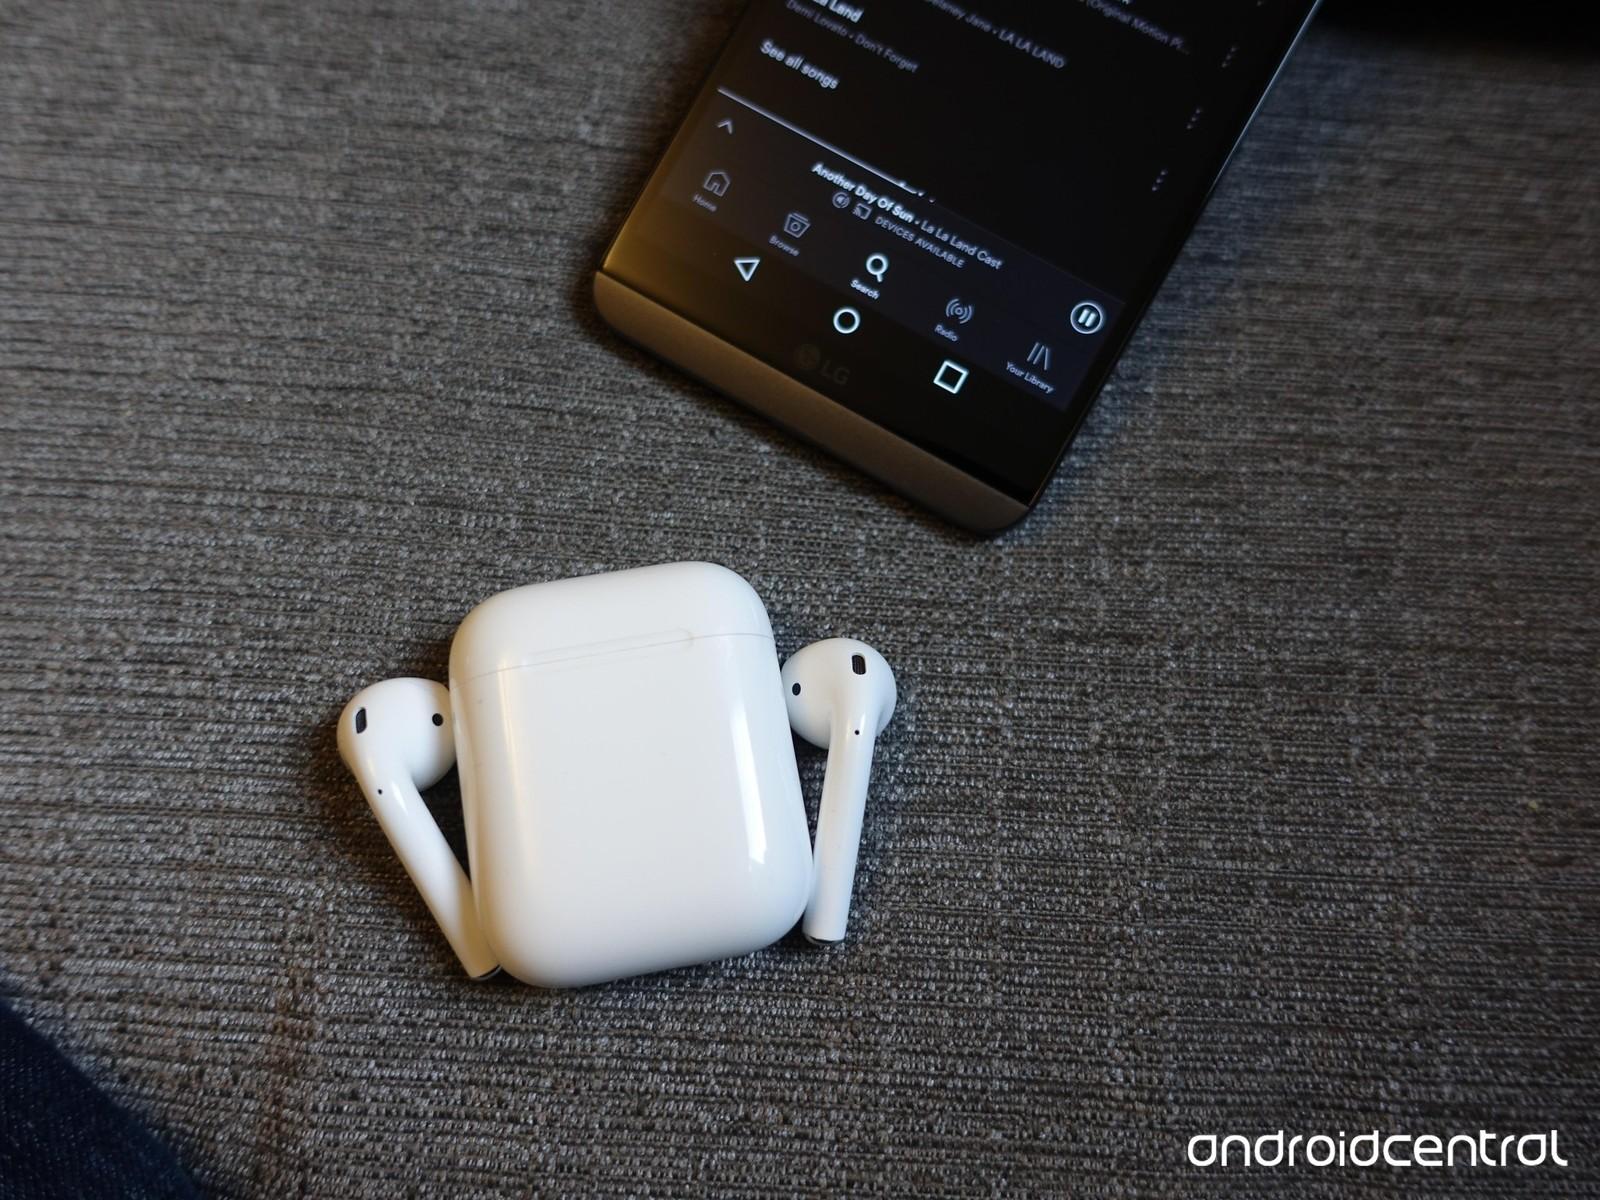 Apple's AirPods may be the best Bluetooth earbuds for Android